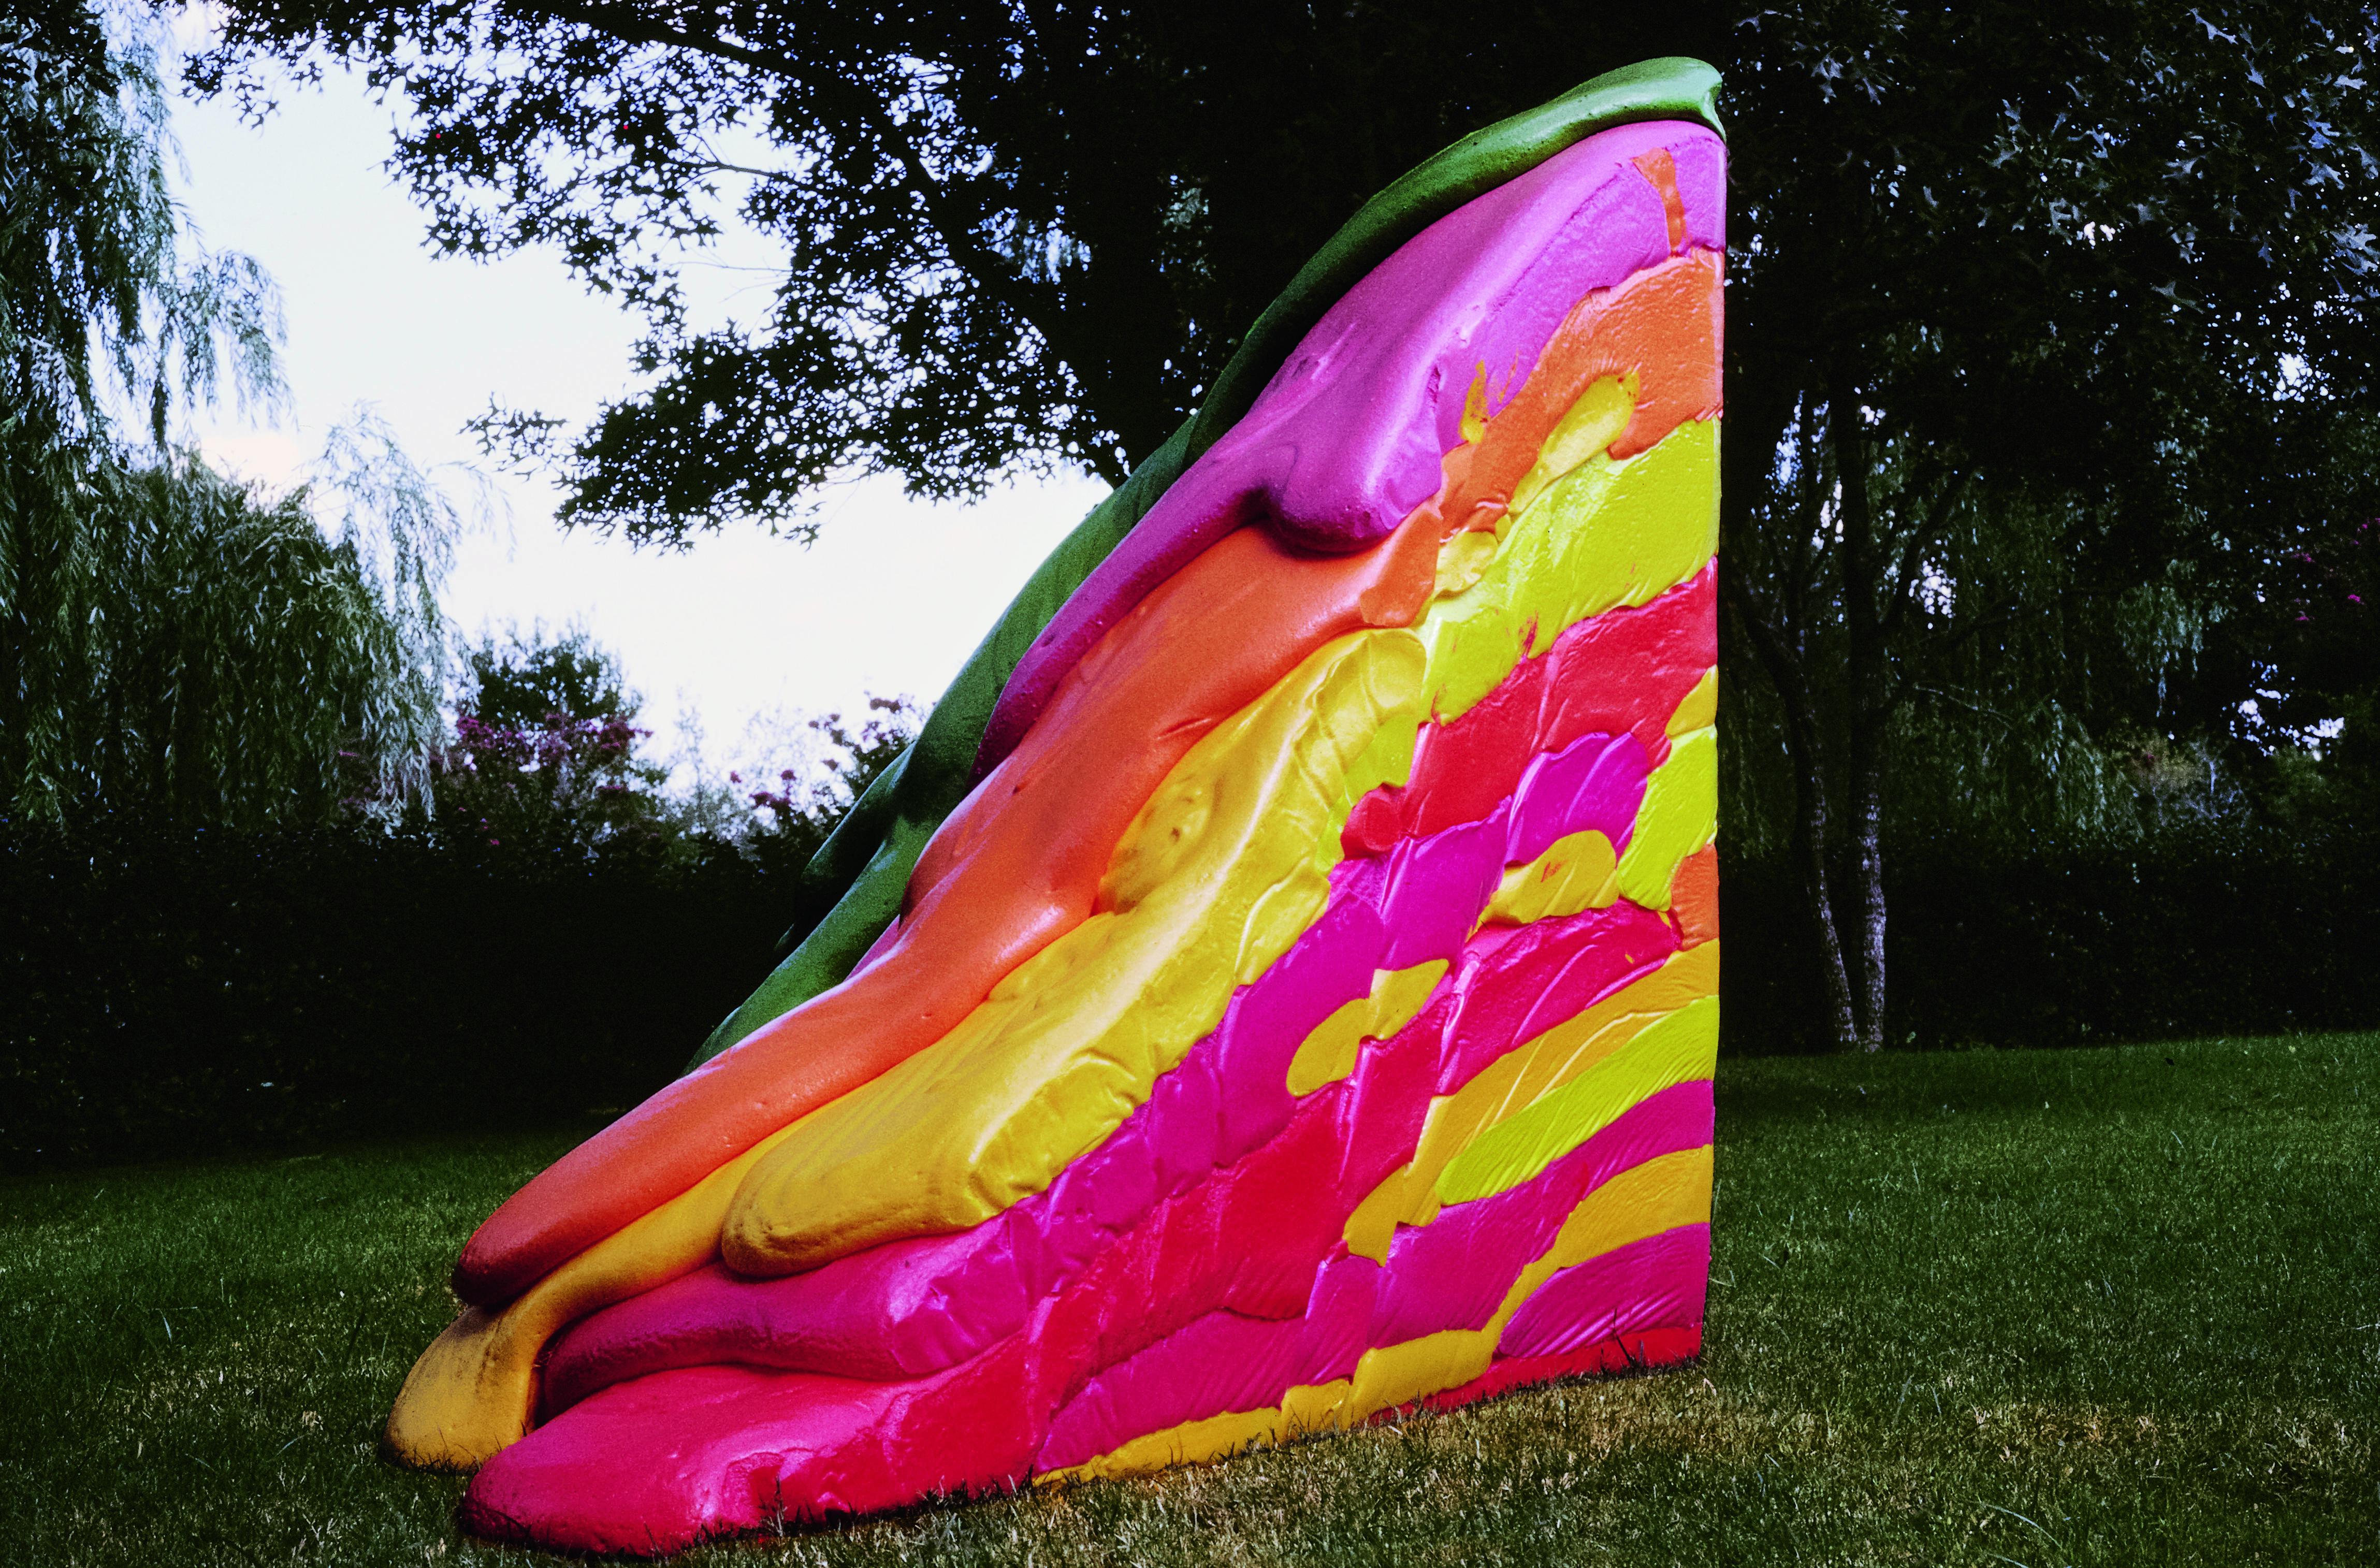 The dangerous chemicals that could have killed Lynda Benglis